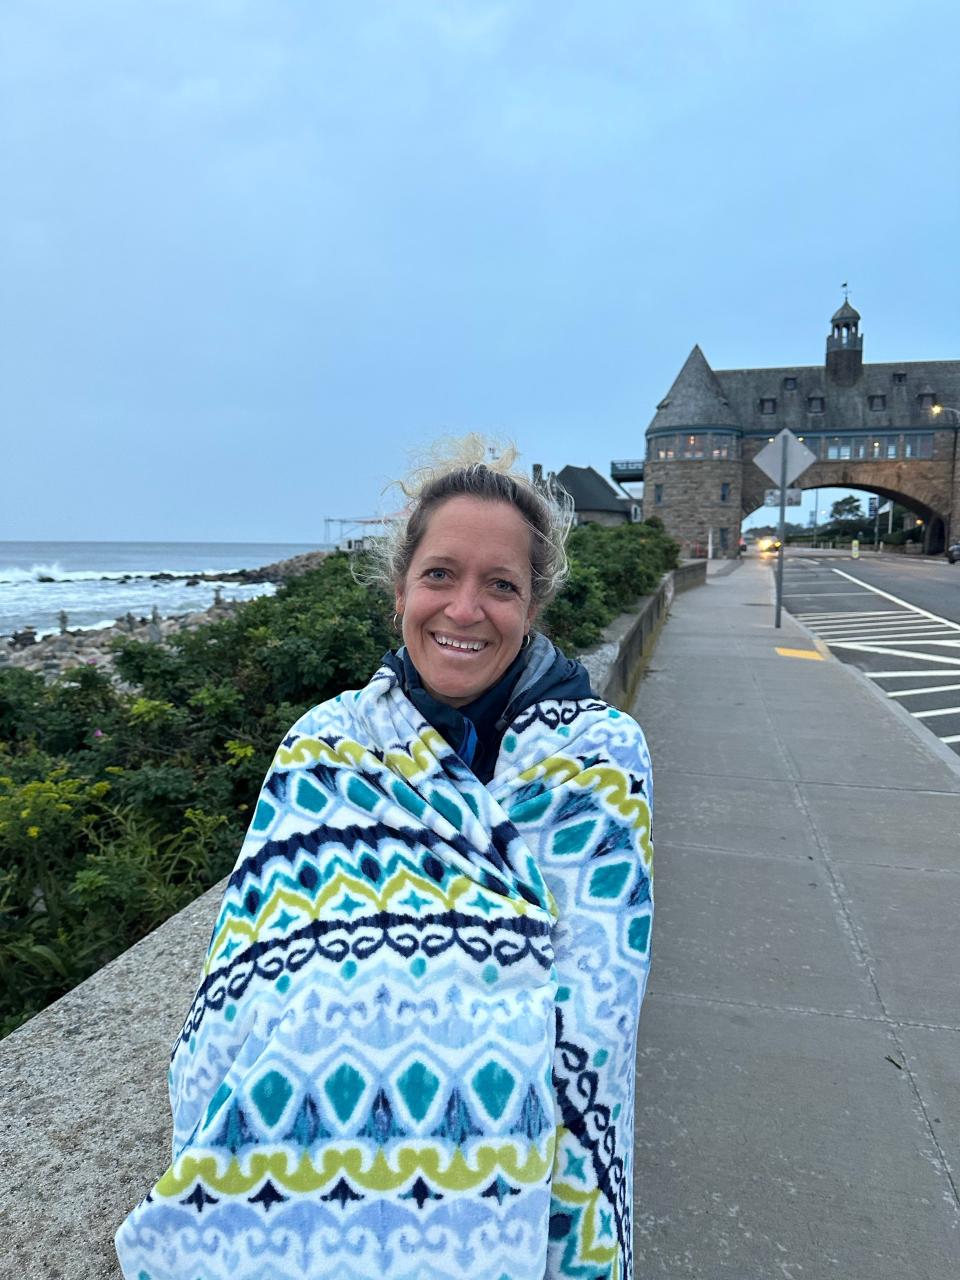 Beth Elam, of Marblehead, Massachusetts got up early at her aunt’s condo to take a sunrise walk across the green next to The Towers to view the ocean stirred up by Hurricane Lee.